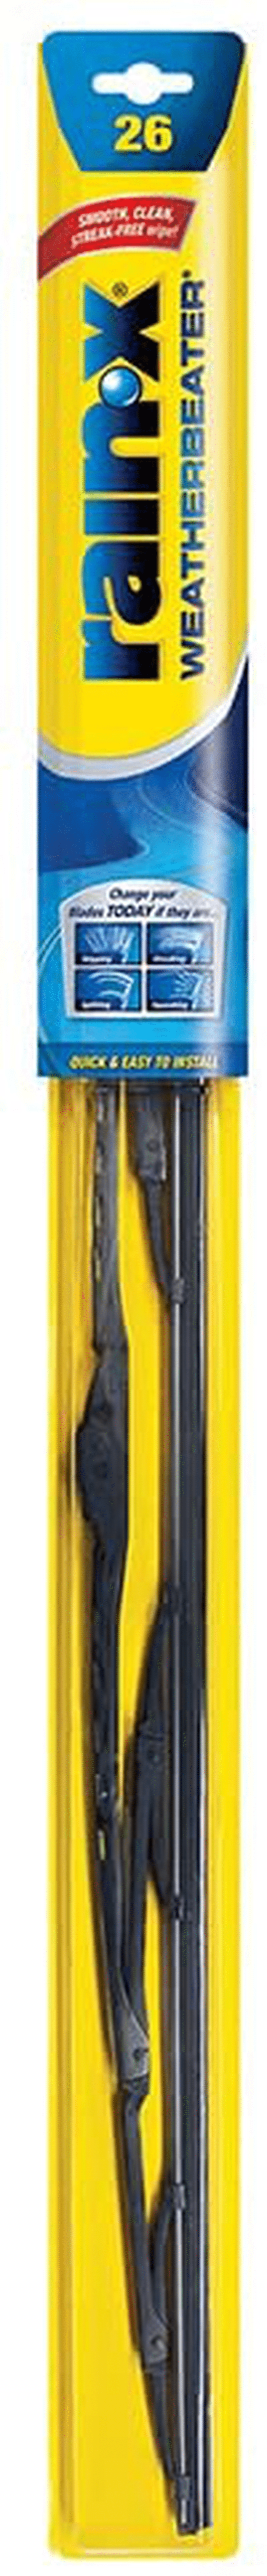 Rain-X RX30218 Weatherbeater Wiper Blade - 18-Inches - (Pack of 1) Vehicles & Parts > Vehicle Parts & Accessories > Motor Vehicle Parts Rain-X Single pack 26 inches 